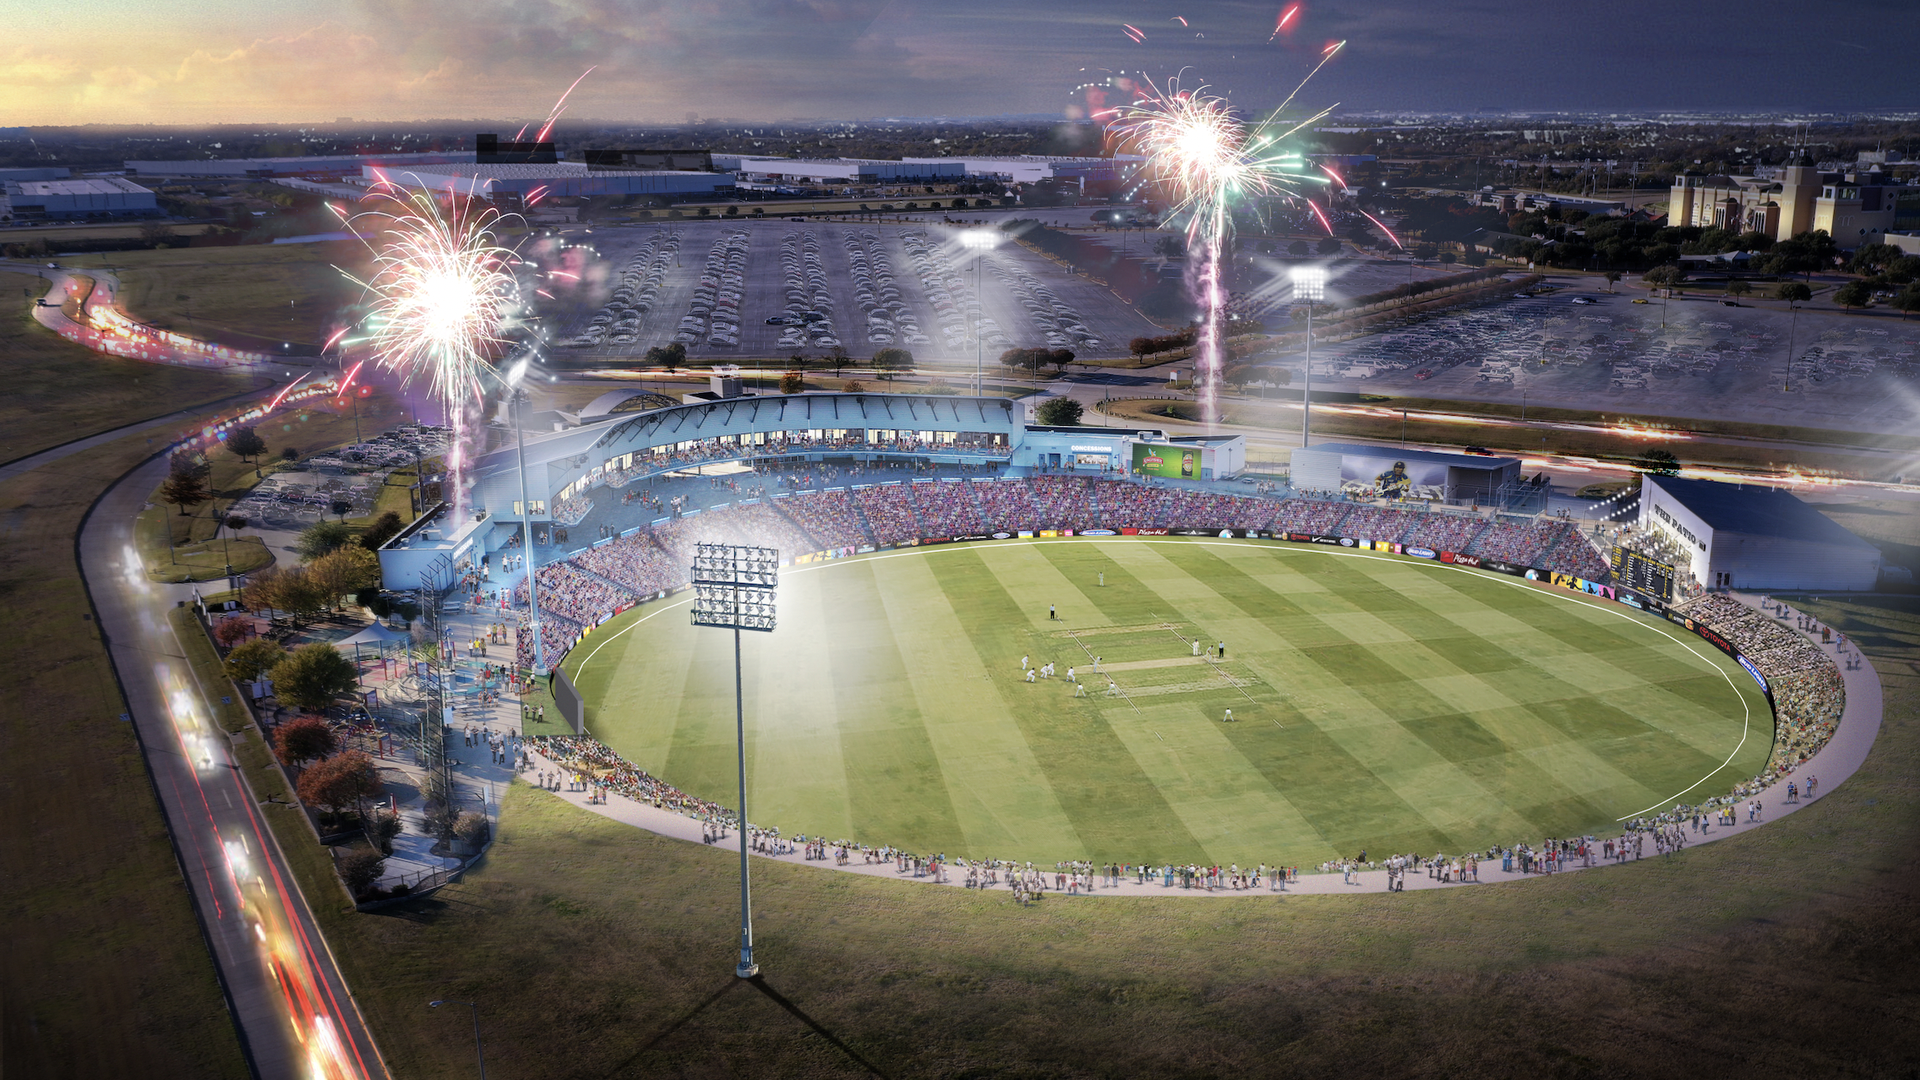 A rendering of a cricket stadium with fireworks